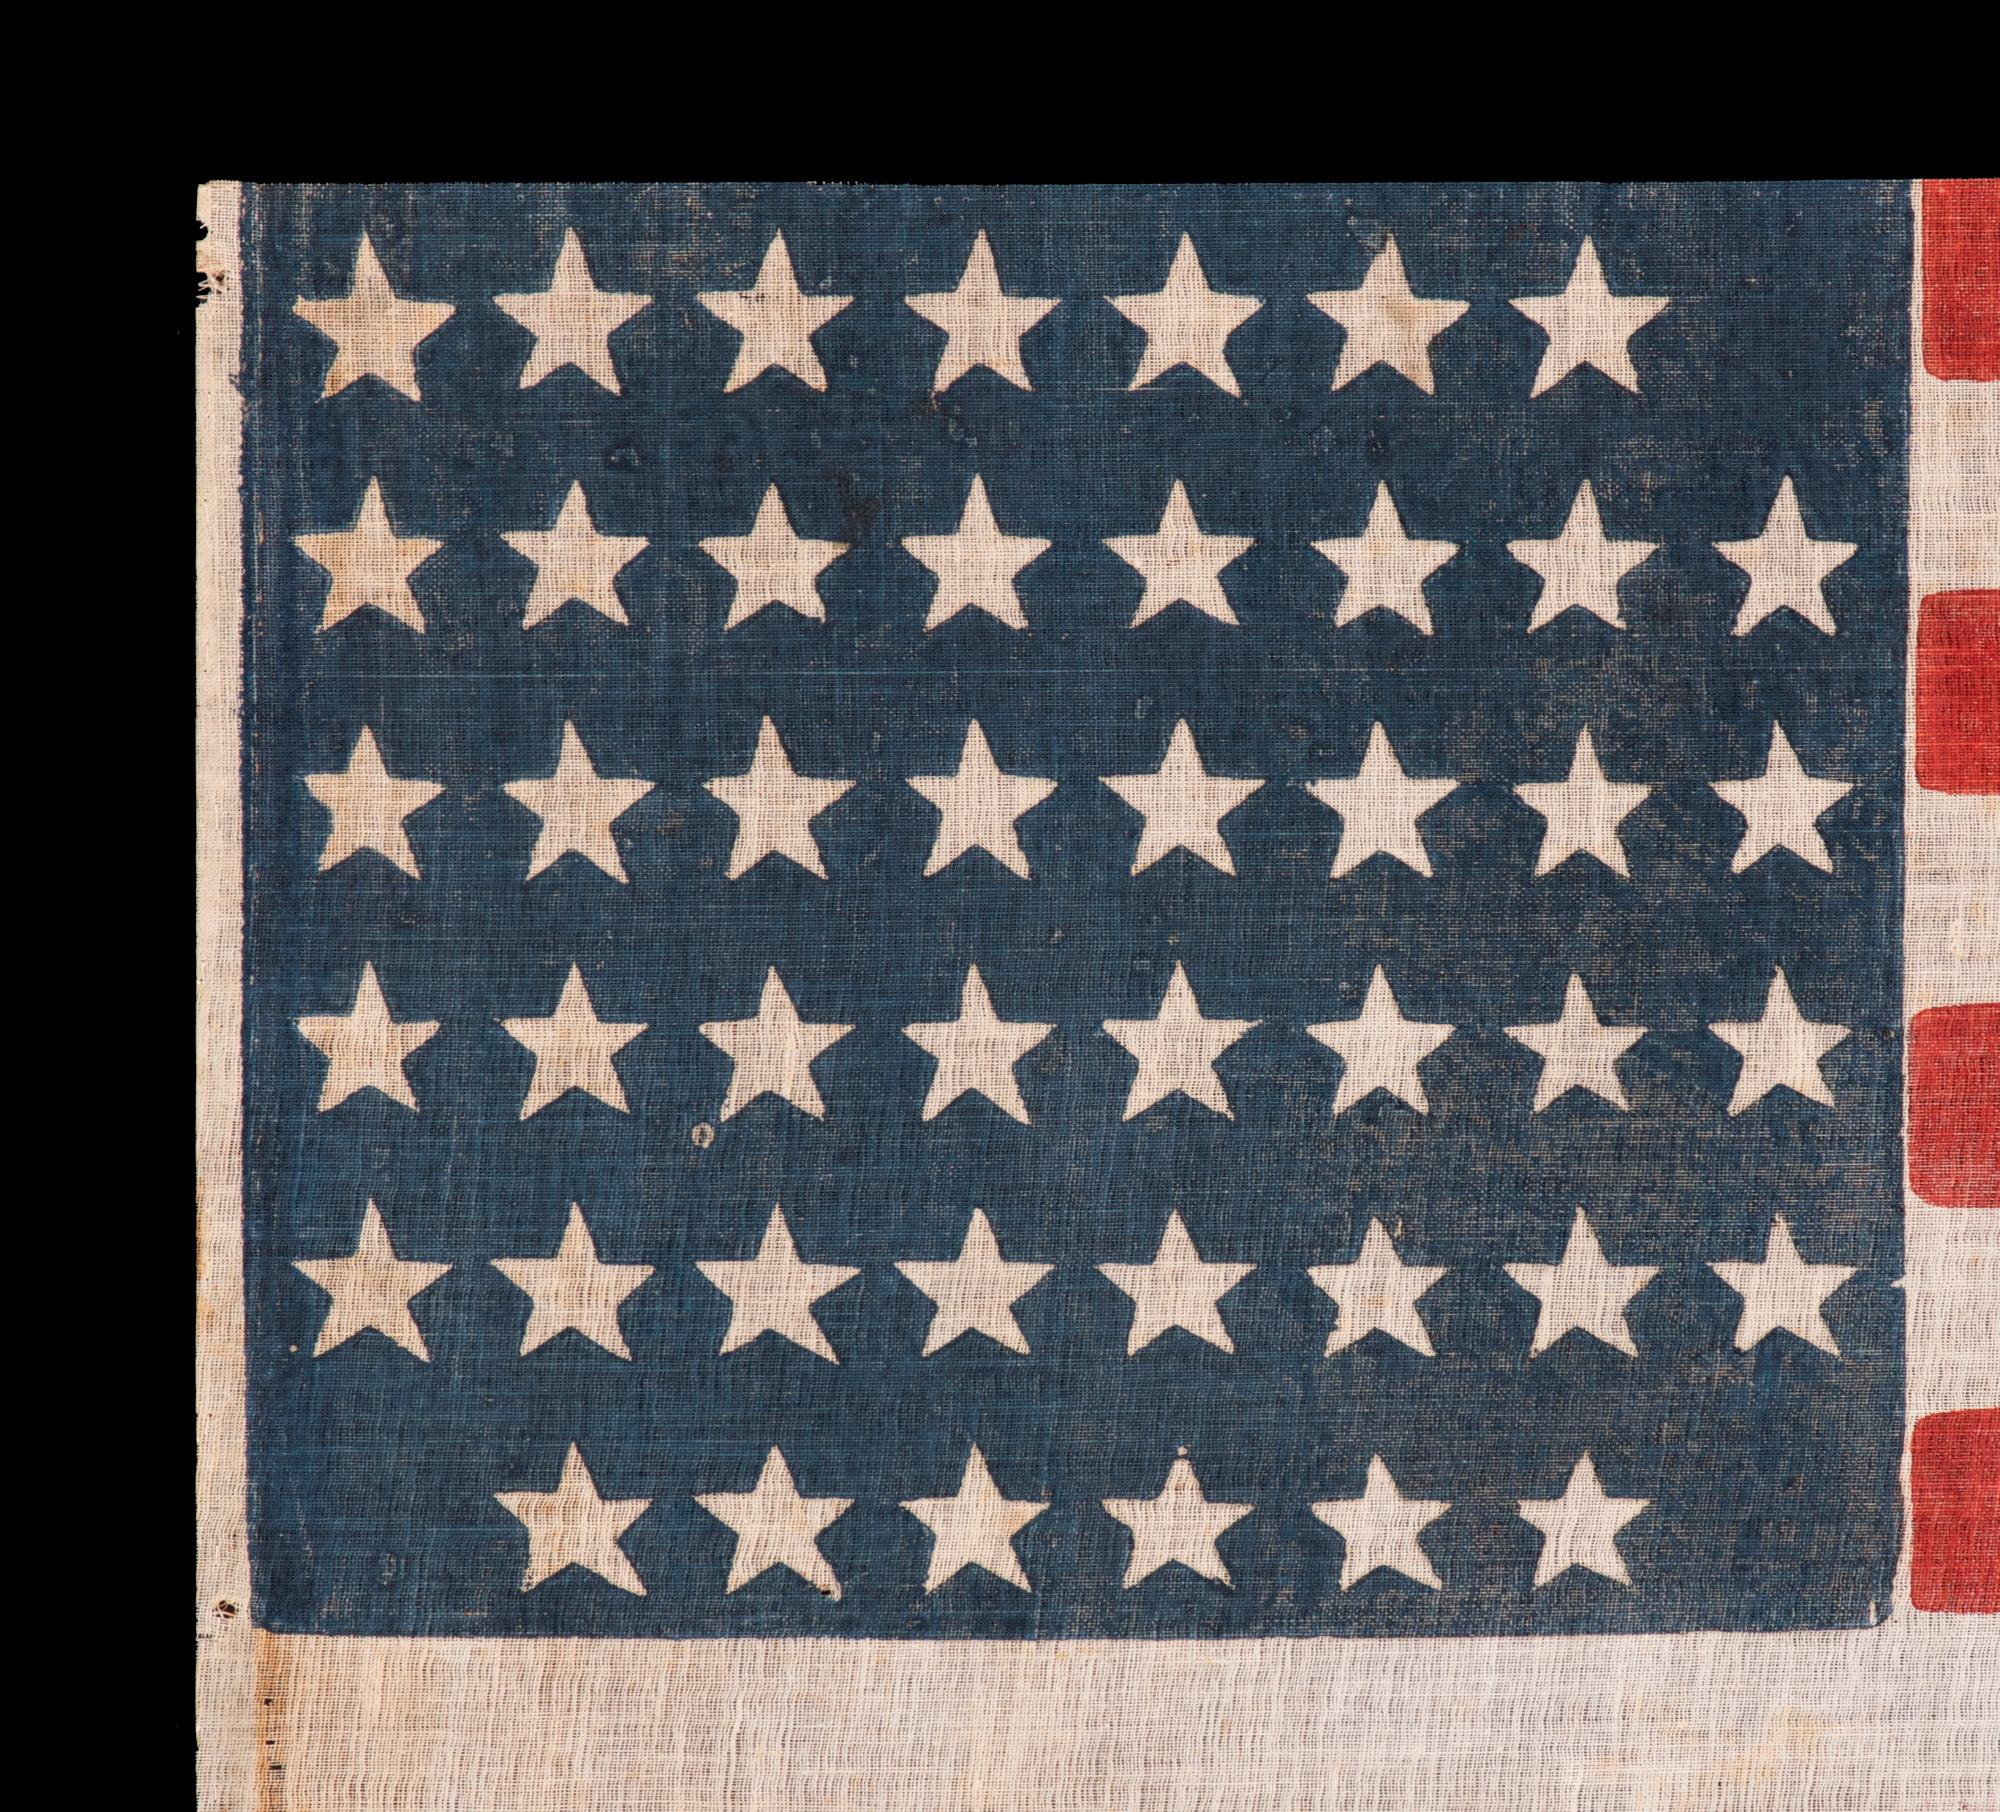 45 Star Antique American Flag, Utah Statehood, Ca 1896-1908 In Good Condition In York County, PA